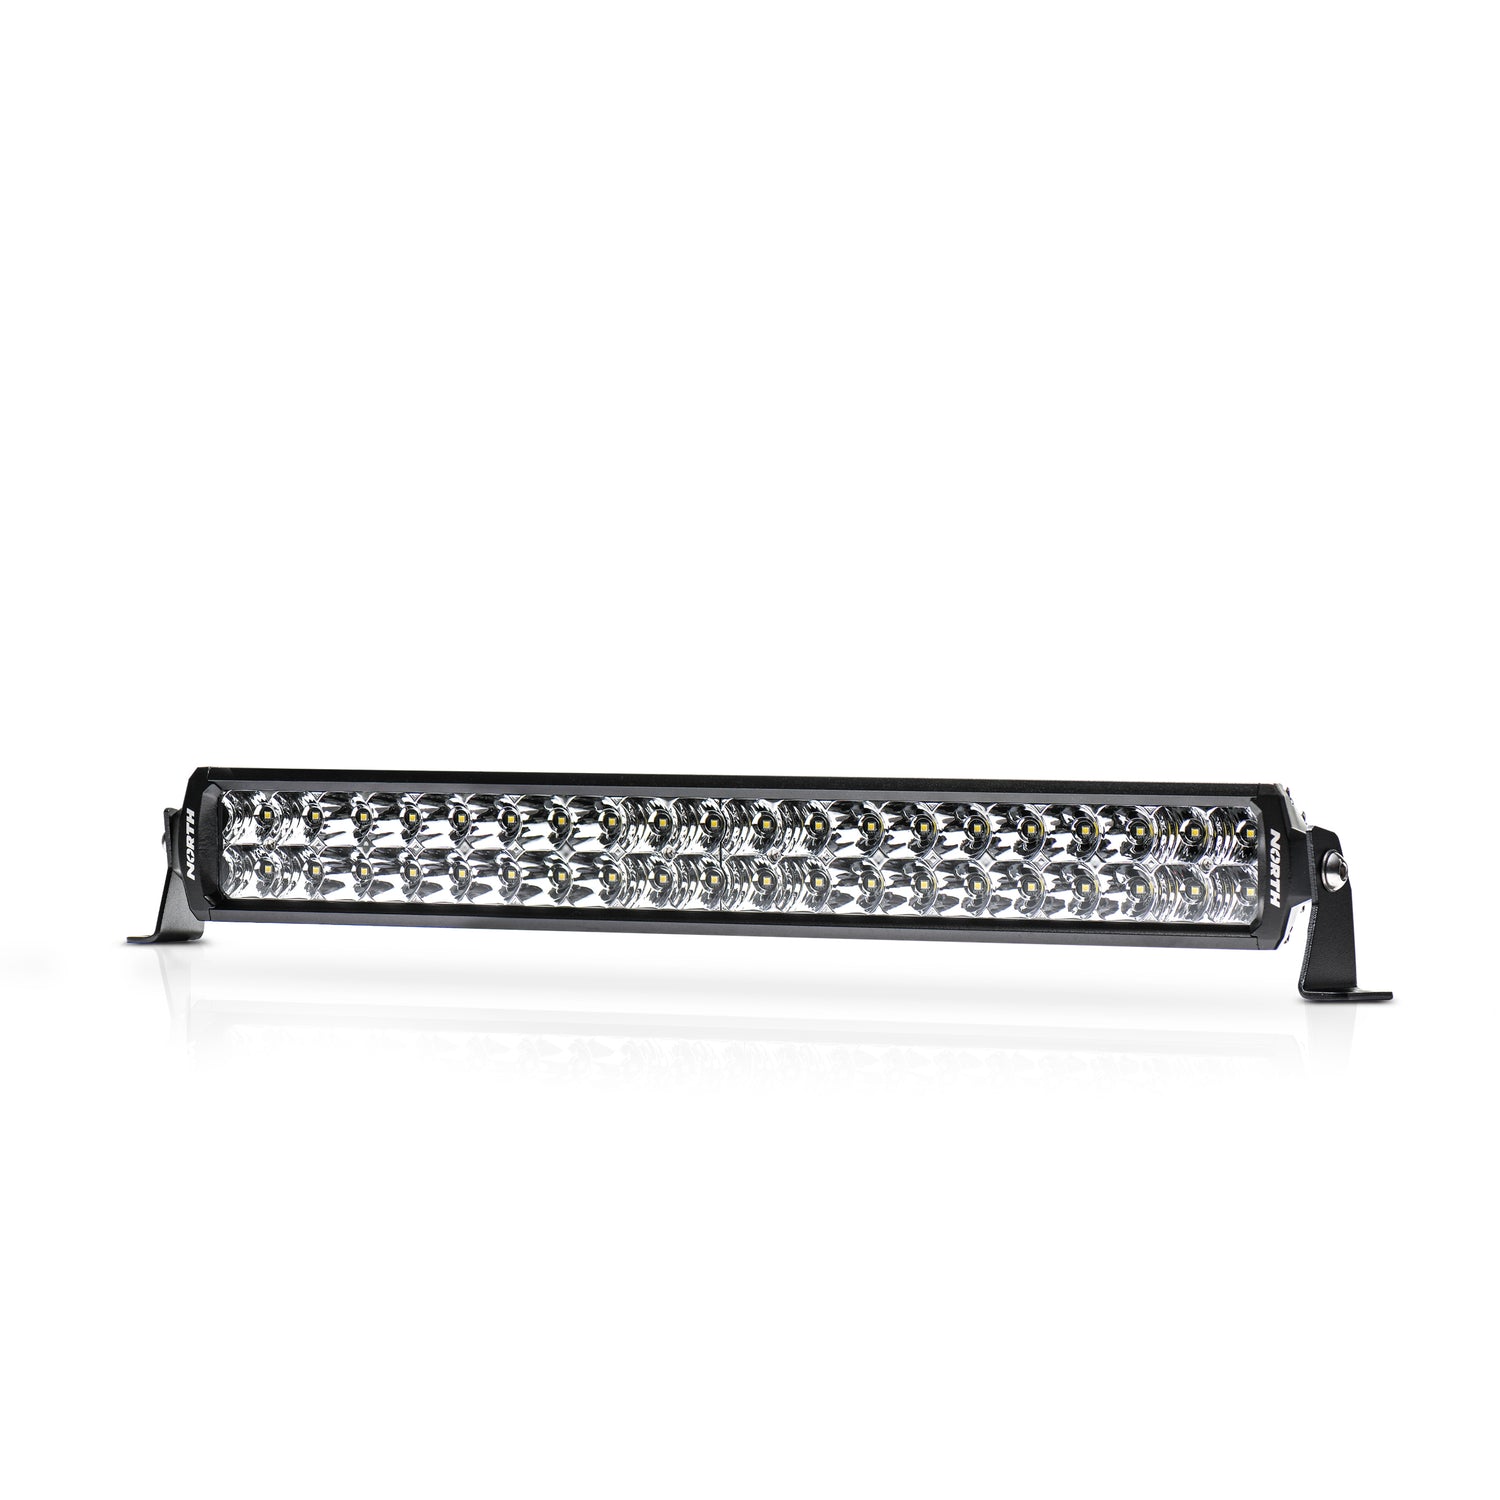 Row LED Light Bars + Harness – MOVE Bumpers